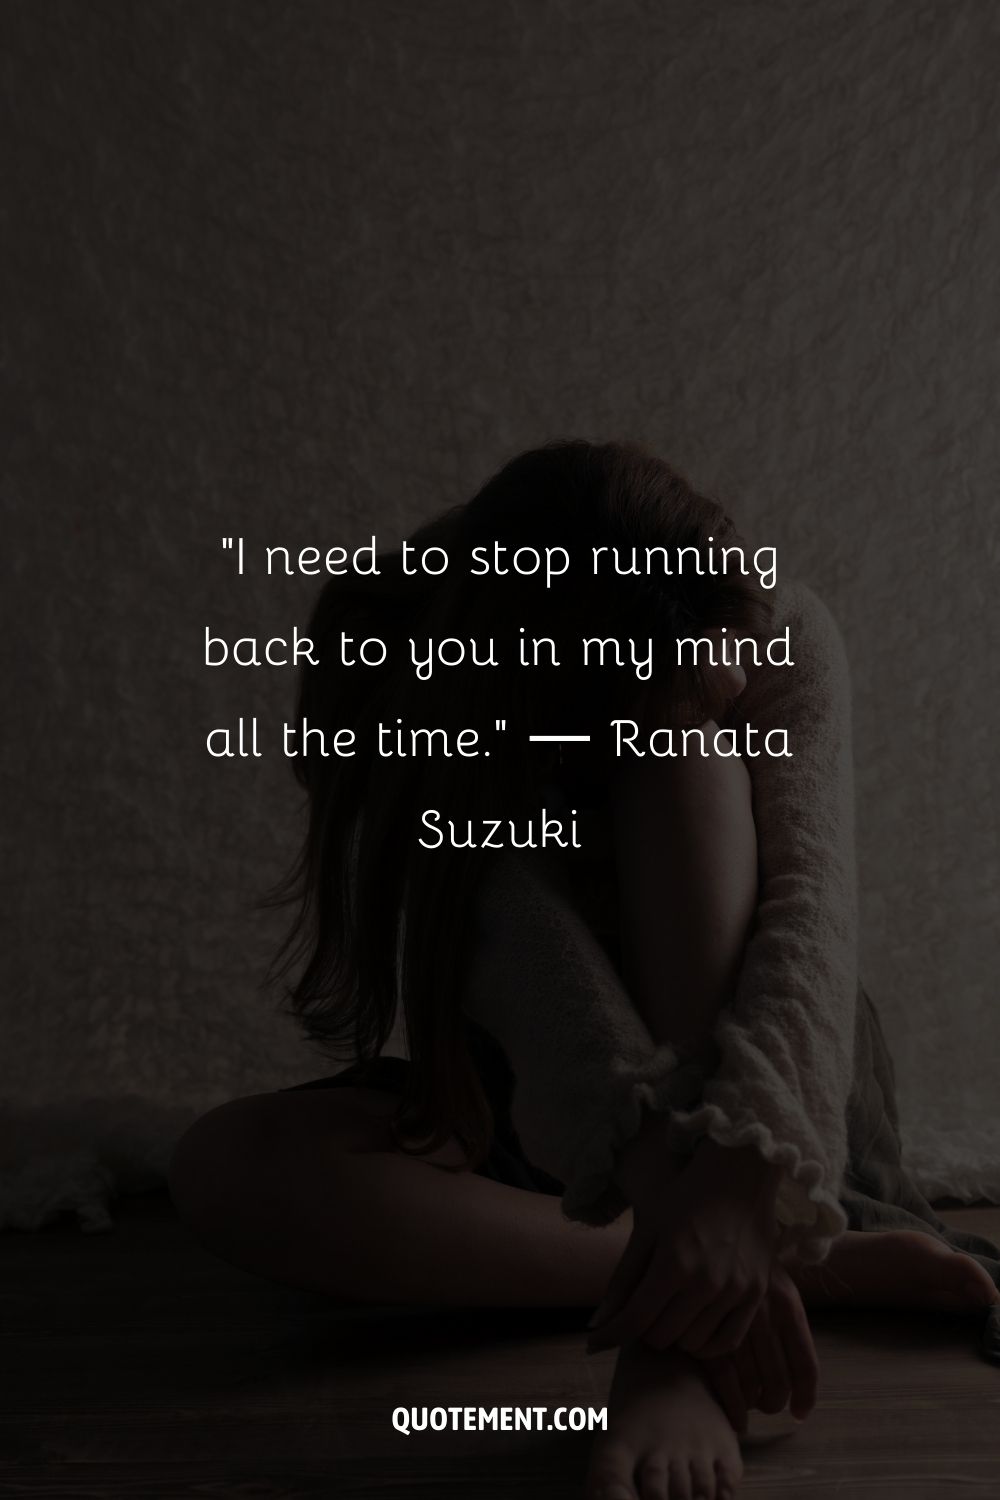 I need to stop running back to you in my mind all the time.